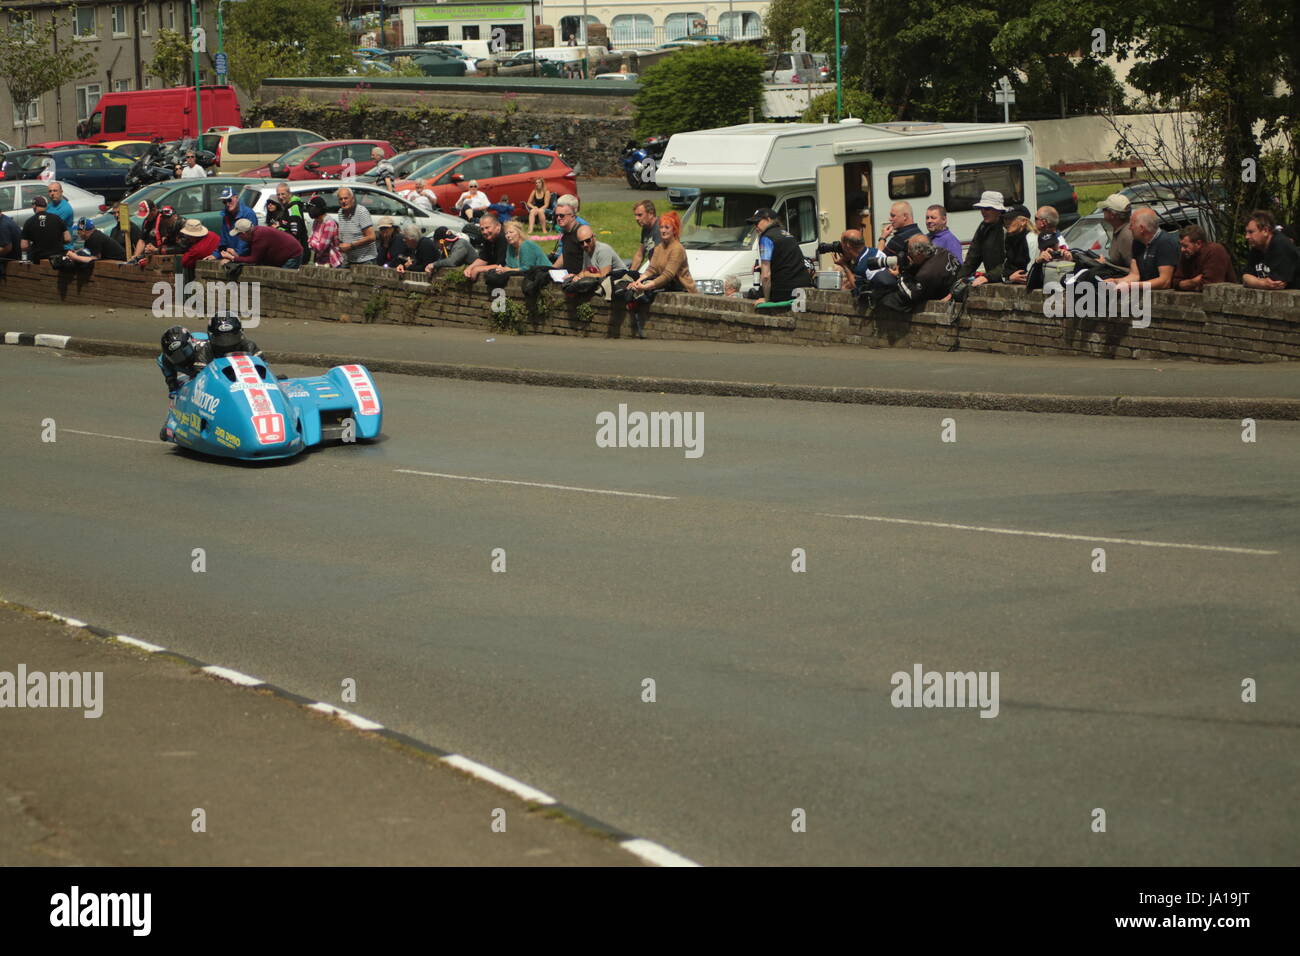 Isle of Man TT Races, Sidecar Qualifying Practice Race, Saturday 3 June 2017. Sidecar qualifying session. Number 11, Tony Baker and Fiona Baker-Holden on their 600cc Baker Suzuki sidecar from the Silicone Engineering and Carl Cox Motorsport team.   Credit: Eclectic Art and Photography/Alamy Live News. Stock Photo